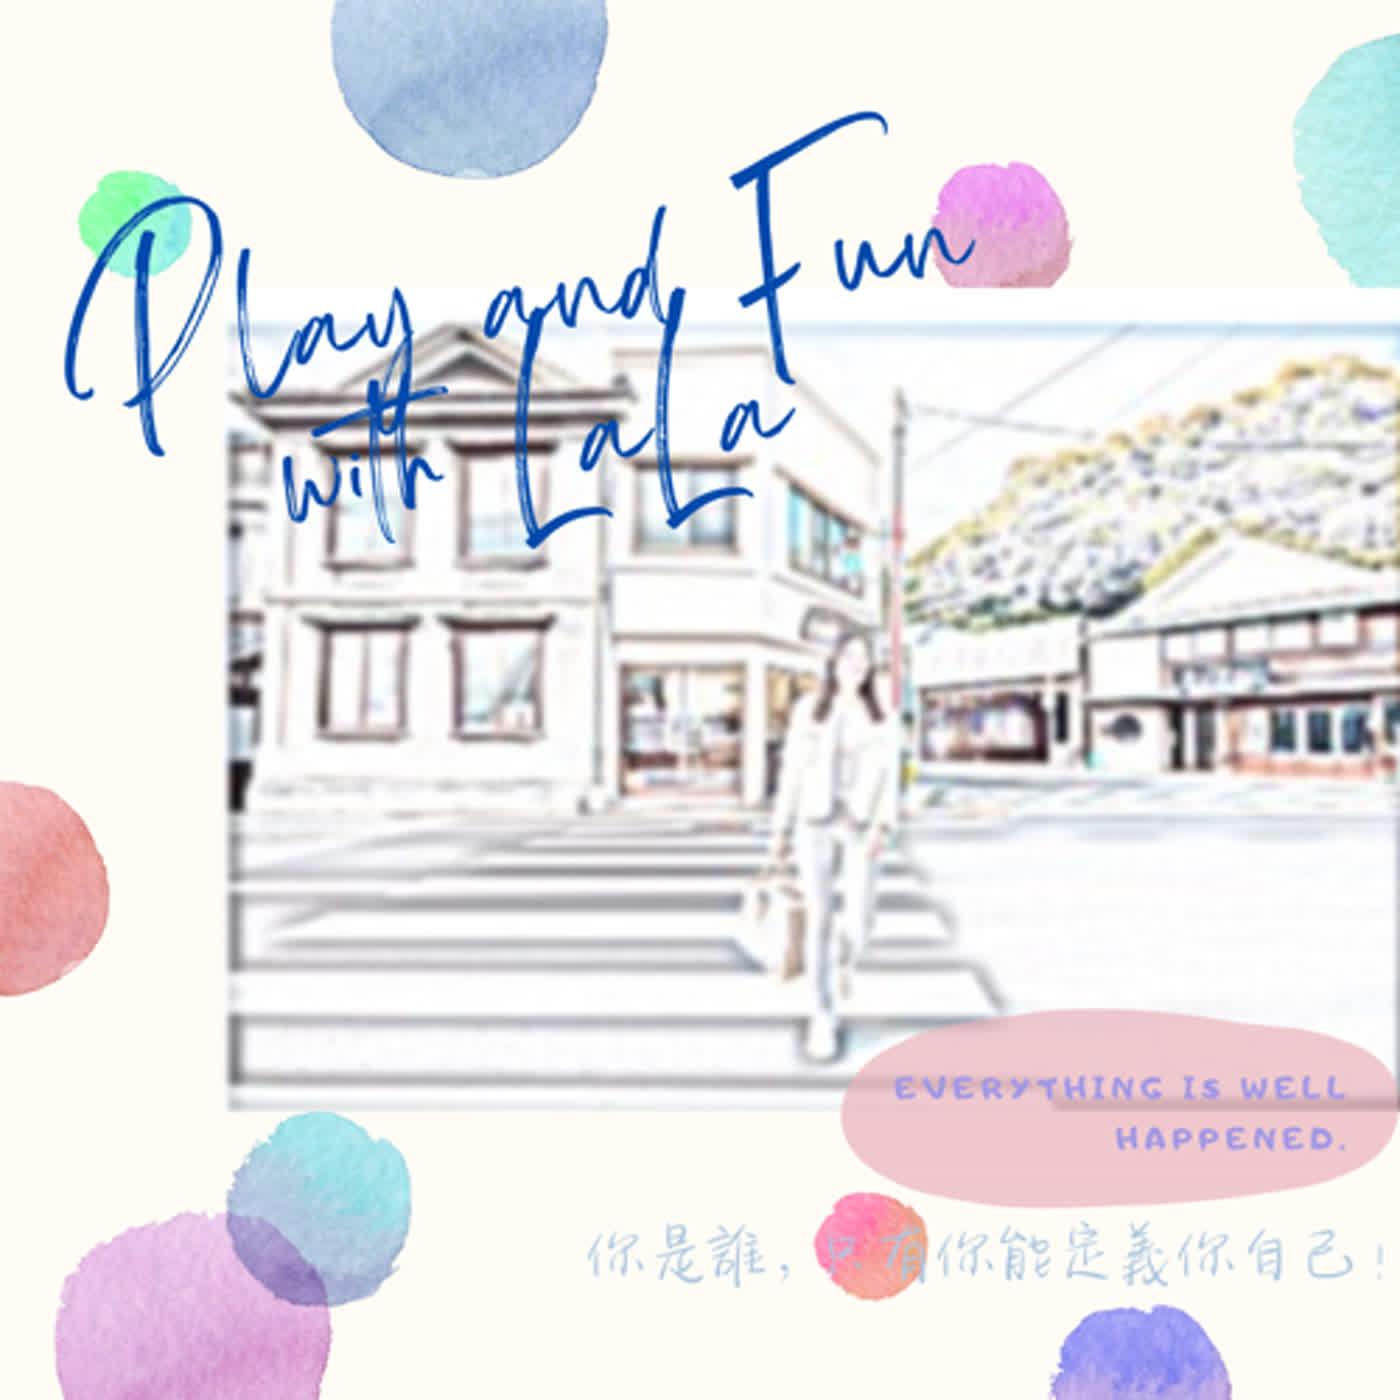 PLAY and FUN with LaLa ♥ 栩栩繪夢．終將所至 PLAY and FUN with LaLa ♥ 栩栩繪夢．終將所至 Podcast Platforms - Flink by Firstory